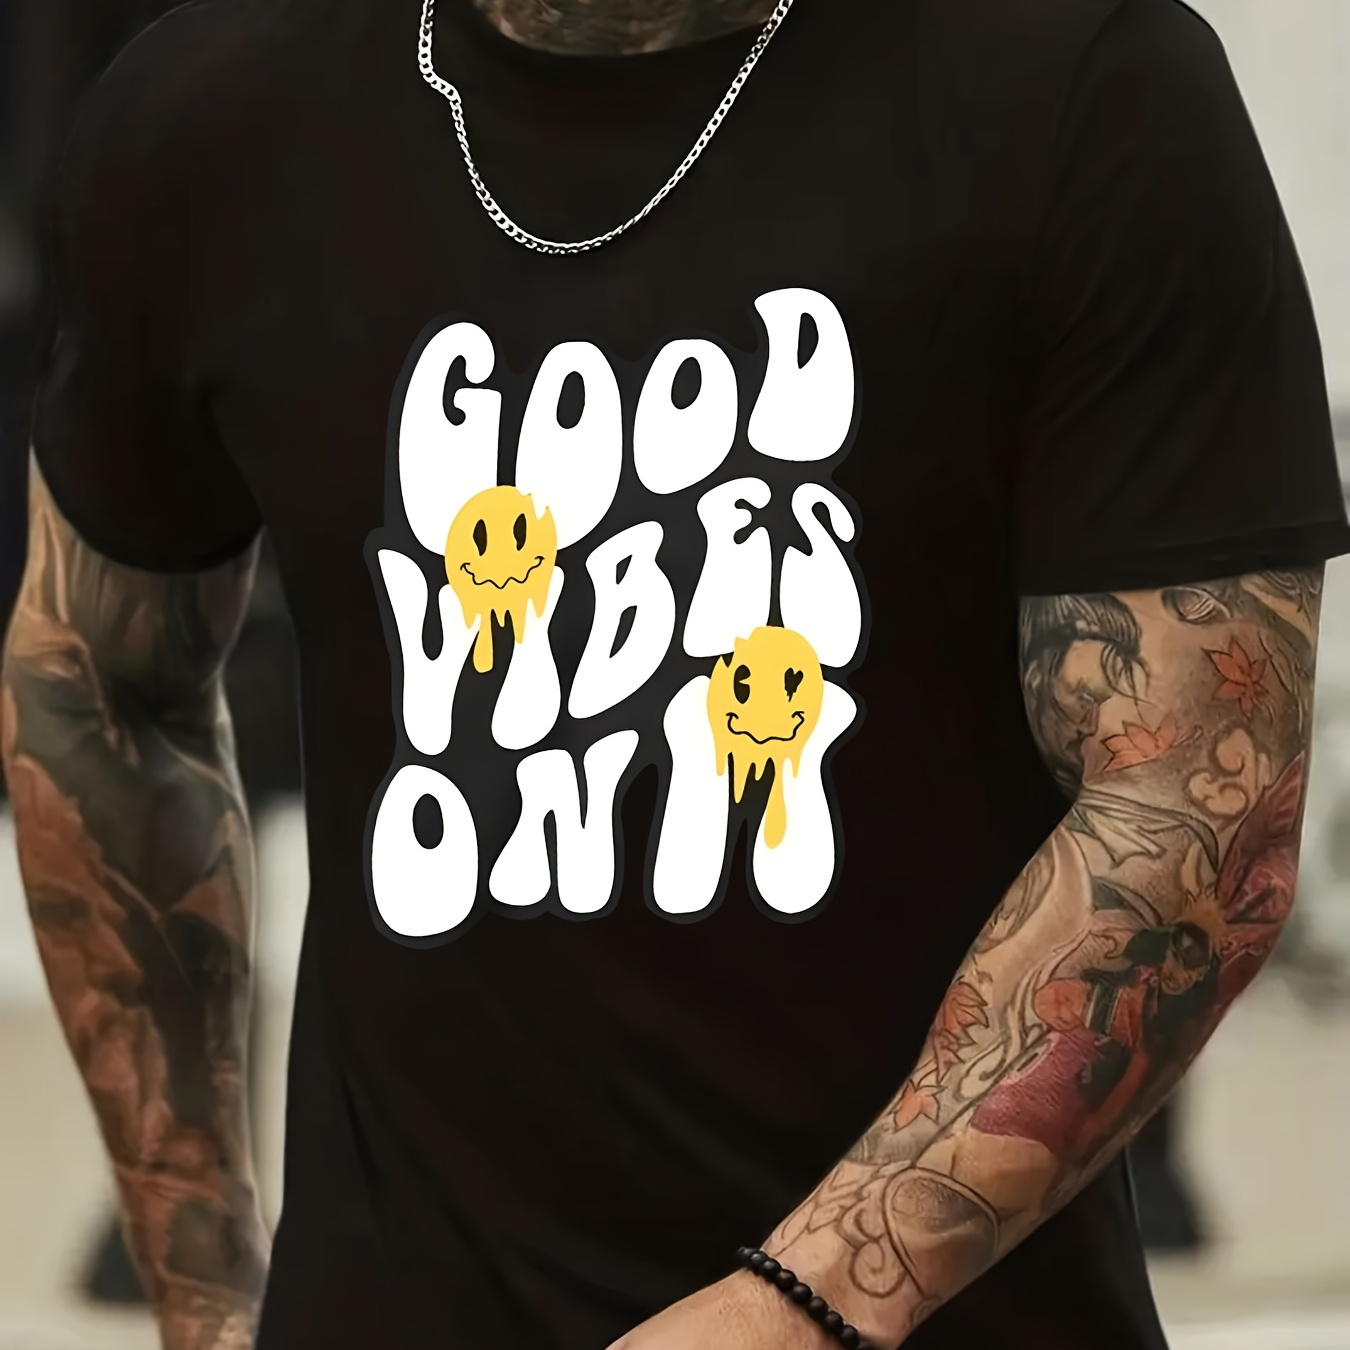 

Graffiti Only And Happy Face Graphic Print, Men's Novel Graphic Design T-shirt, Casual Comfy Tees For Summer, Men's Clothing Tops For Daily Activities